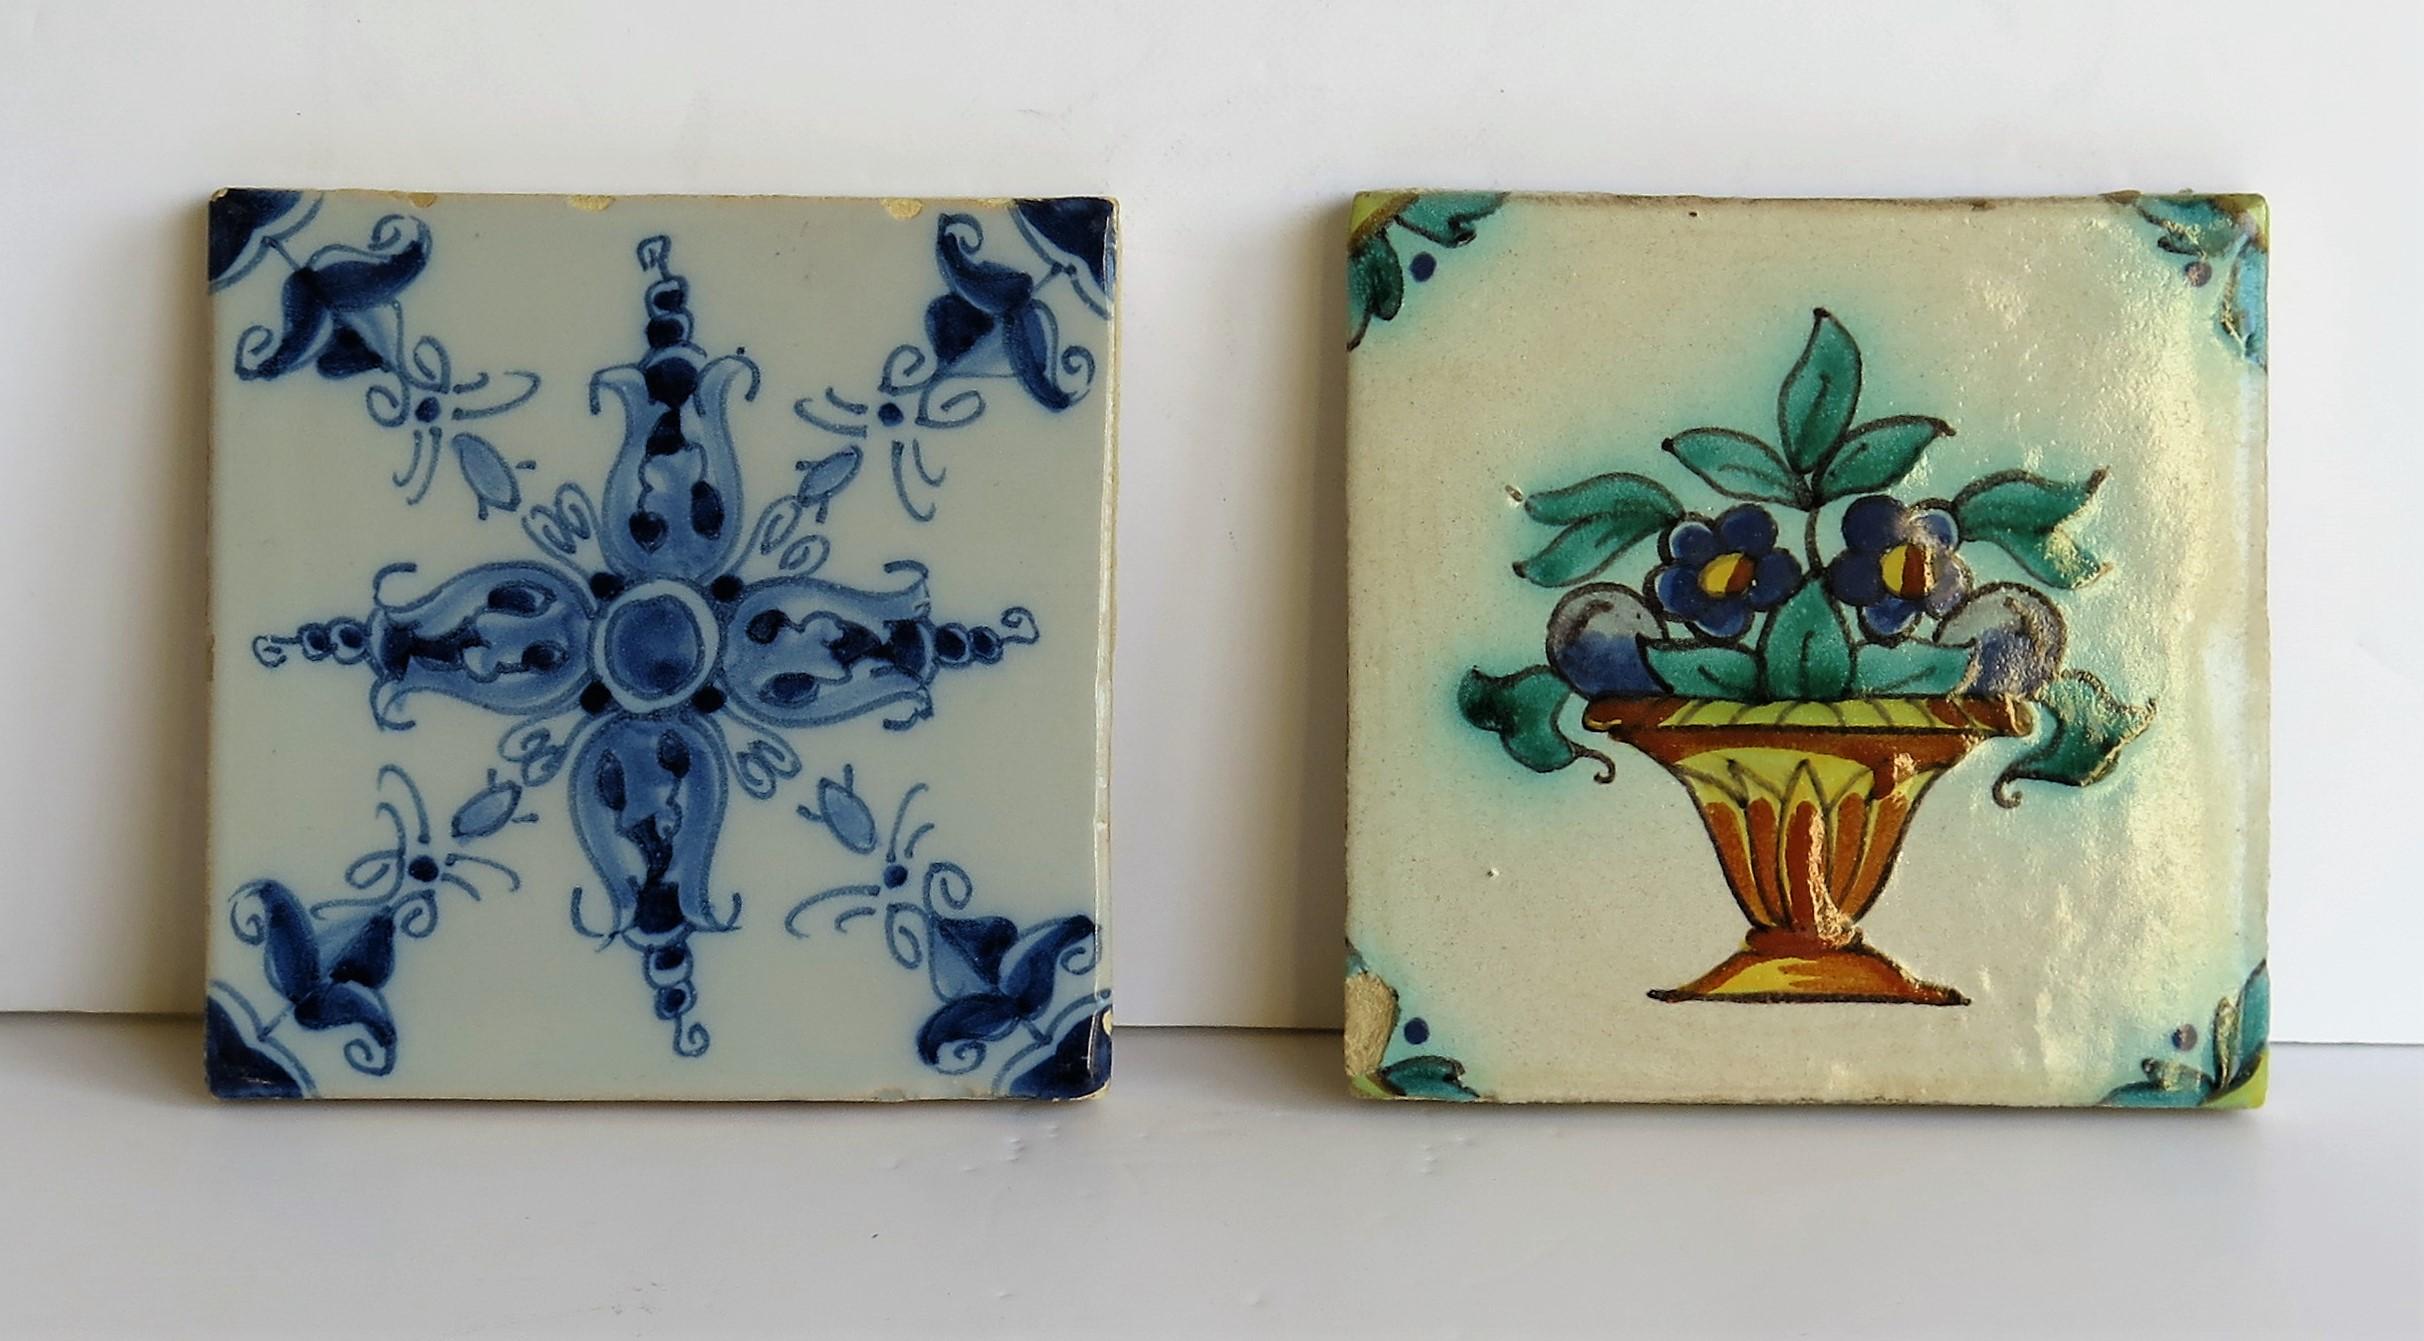 These are two attractive Dutch (Netherlands), Delft ceramic wall tiles, which we date to the 19th century, circa 1870.

The tiles are nominally 4 inches square and over 5/16 inches thick. 

Tile 1 - Blue and white
This is probably the oldest